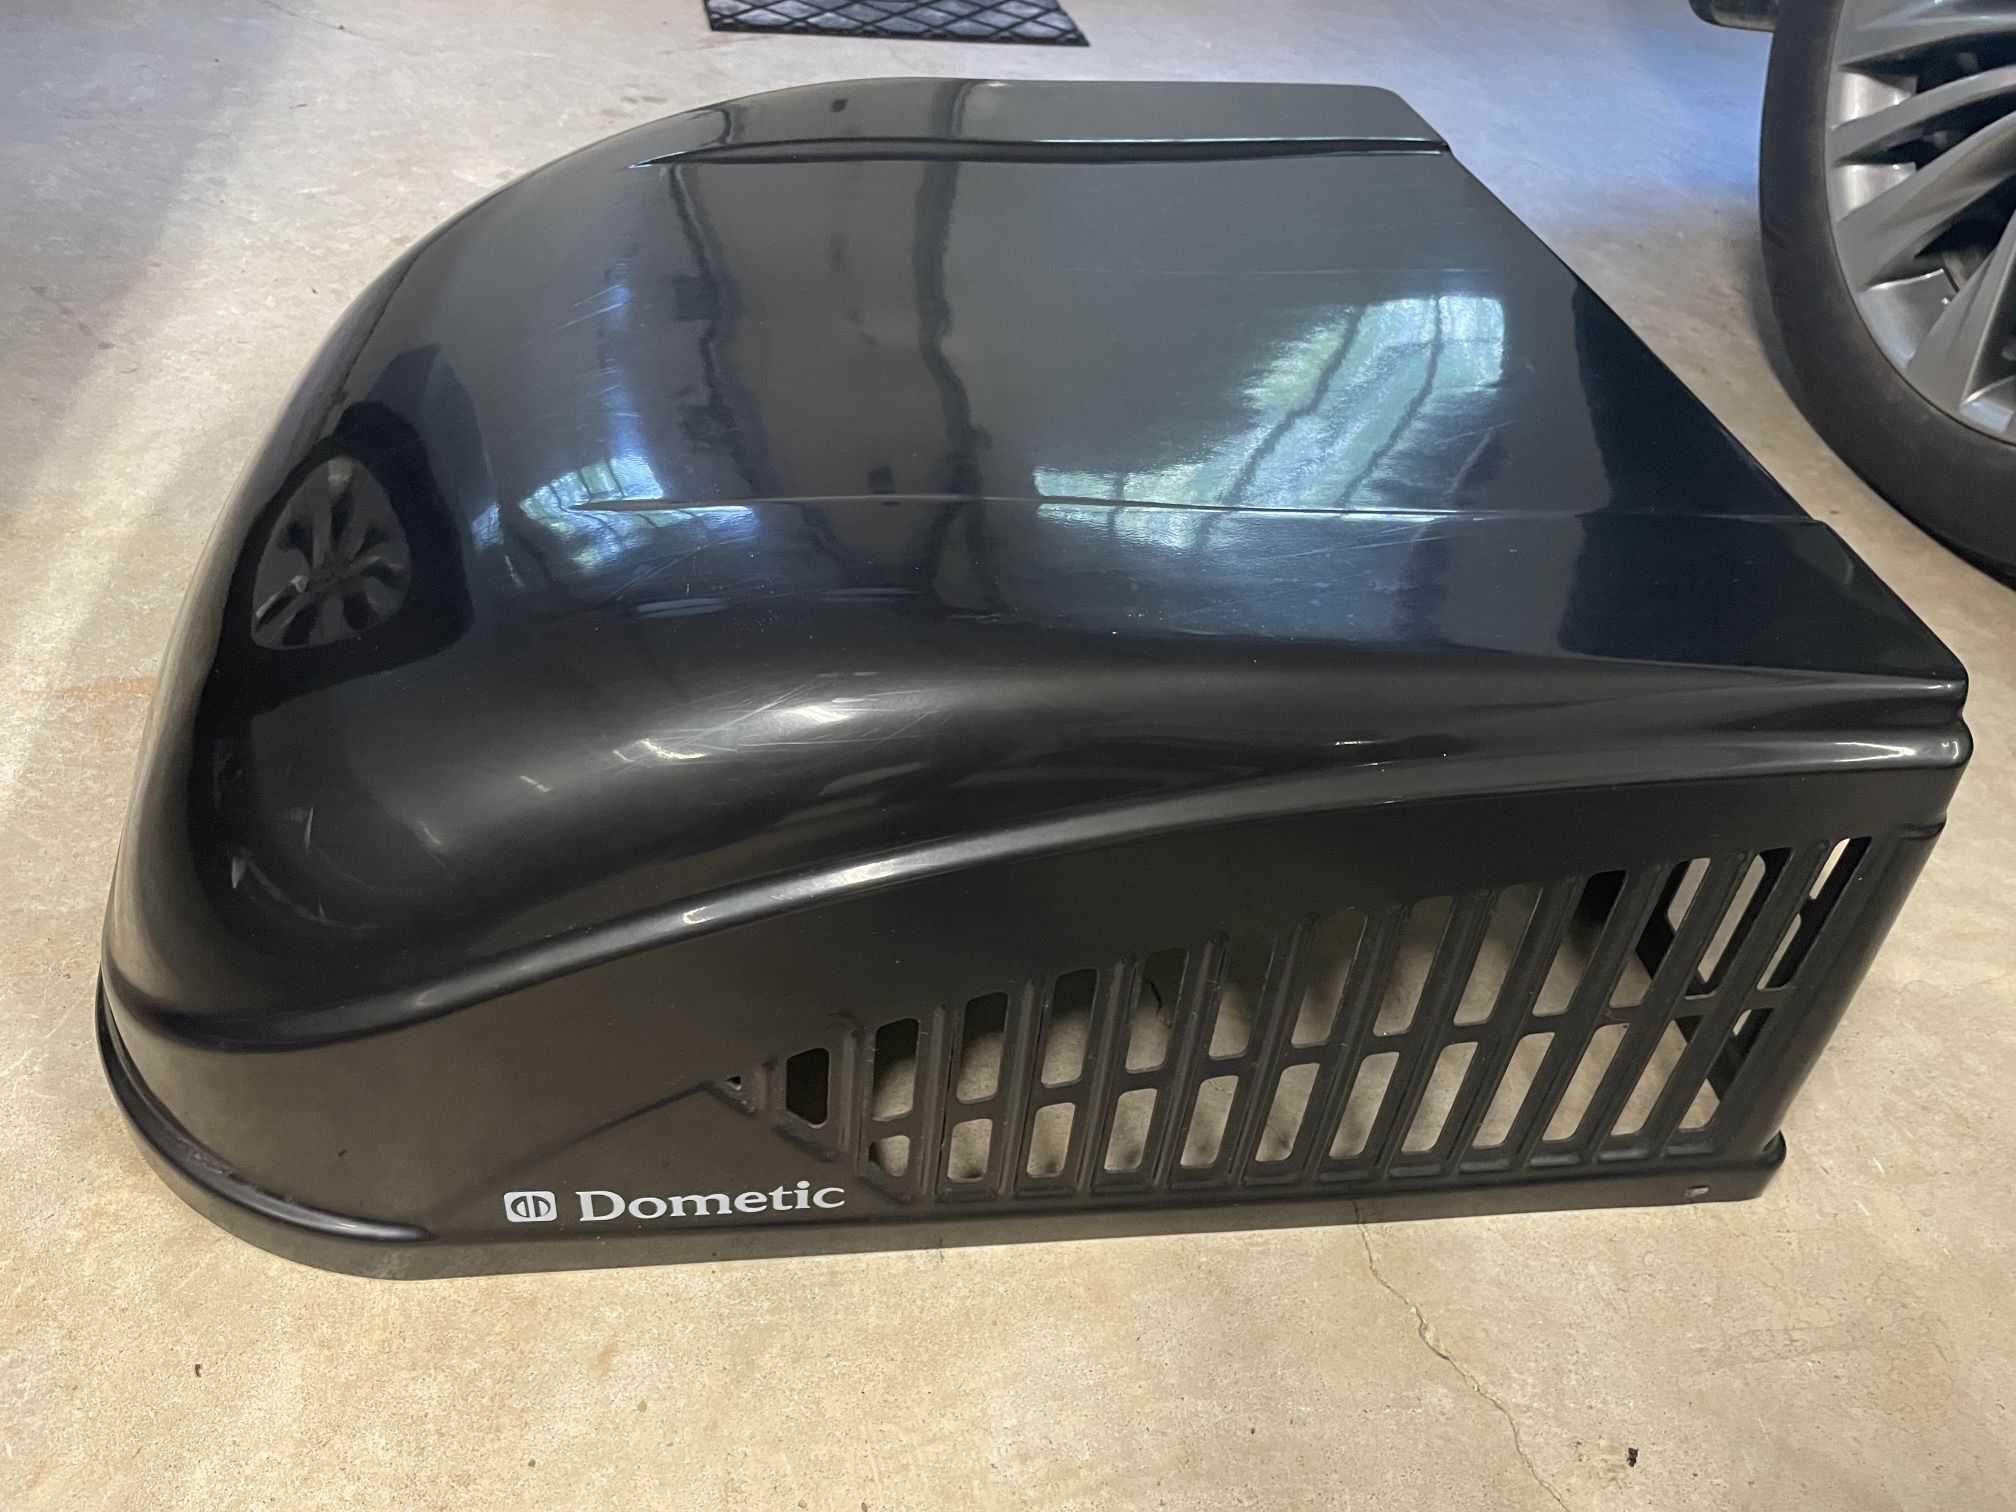 Dometic Air Conditioning Cover and Interior Controls